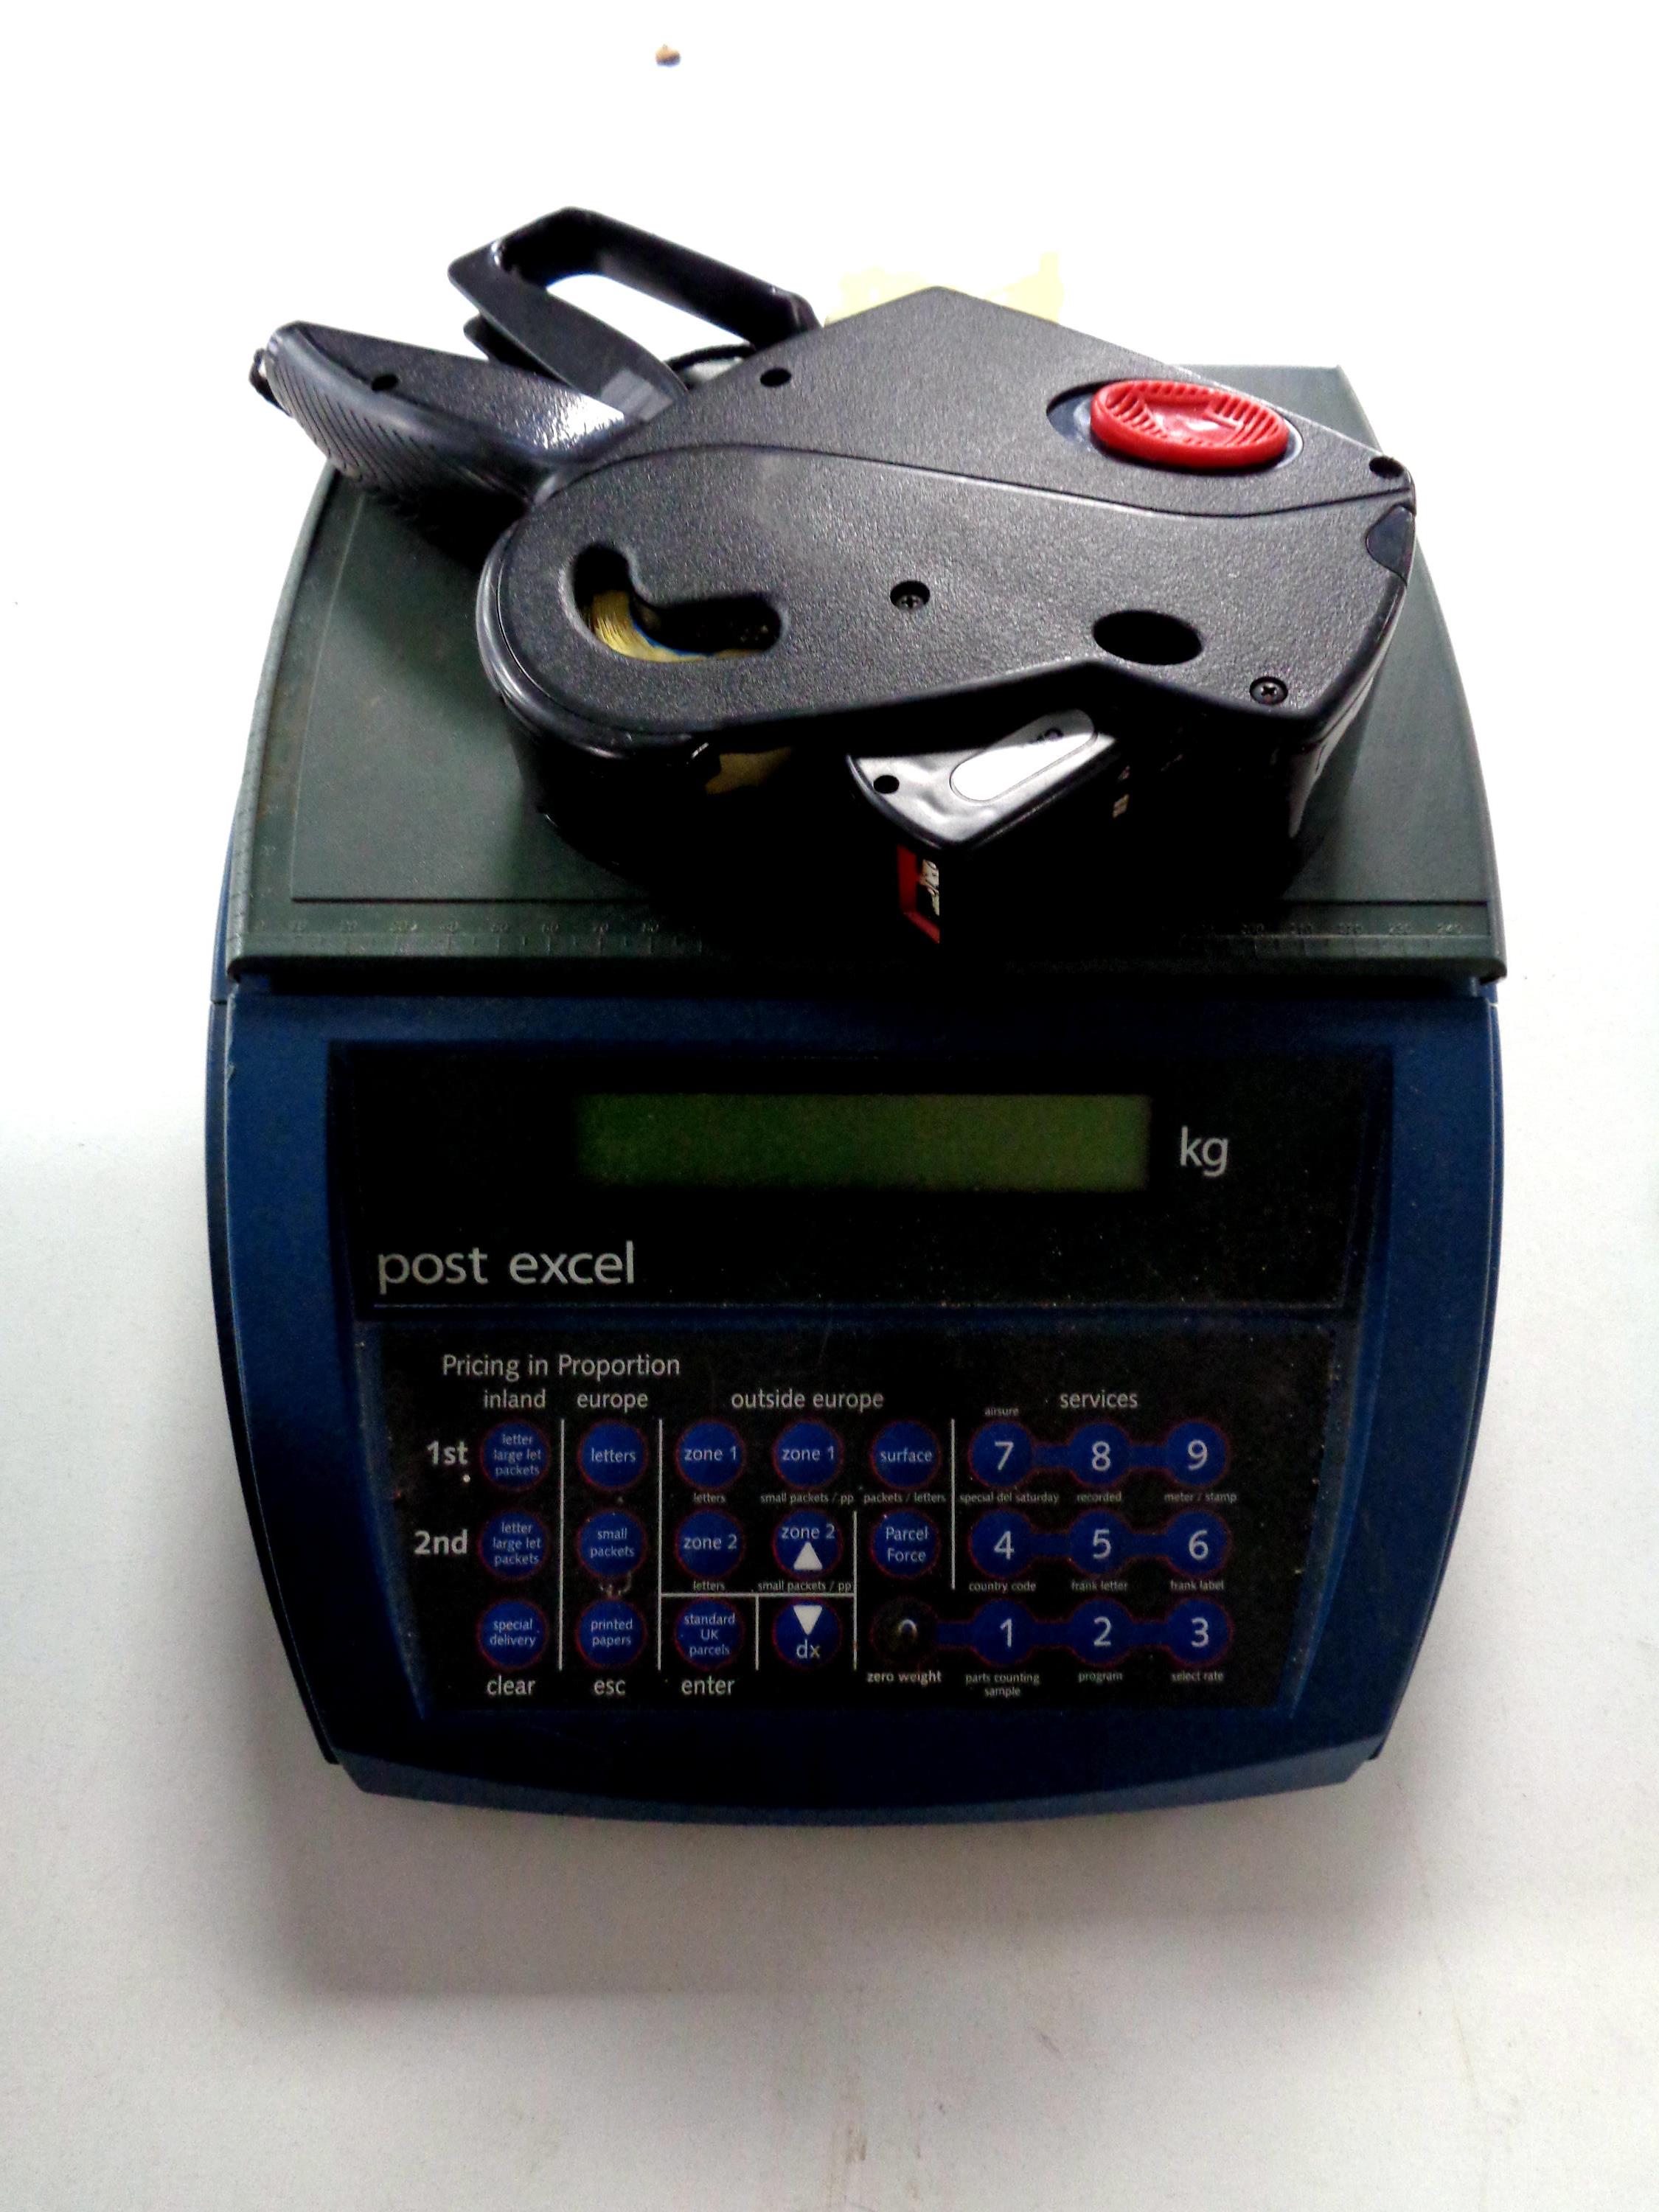 A set of electronic postal scales together with a tally gun